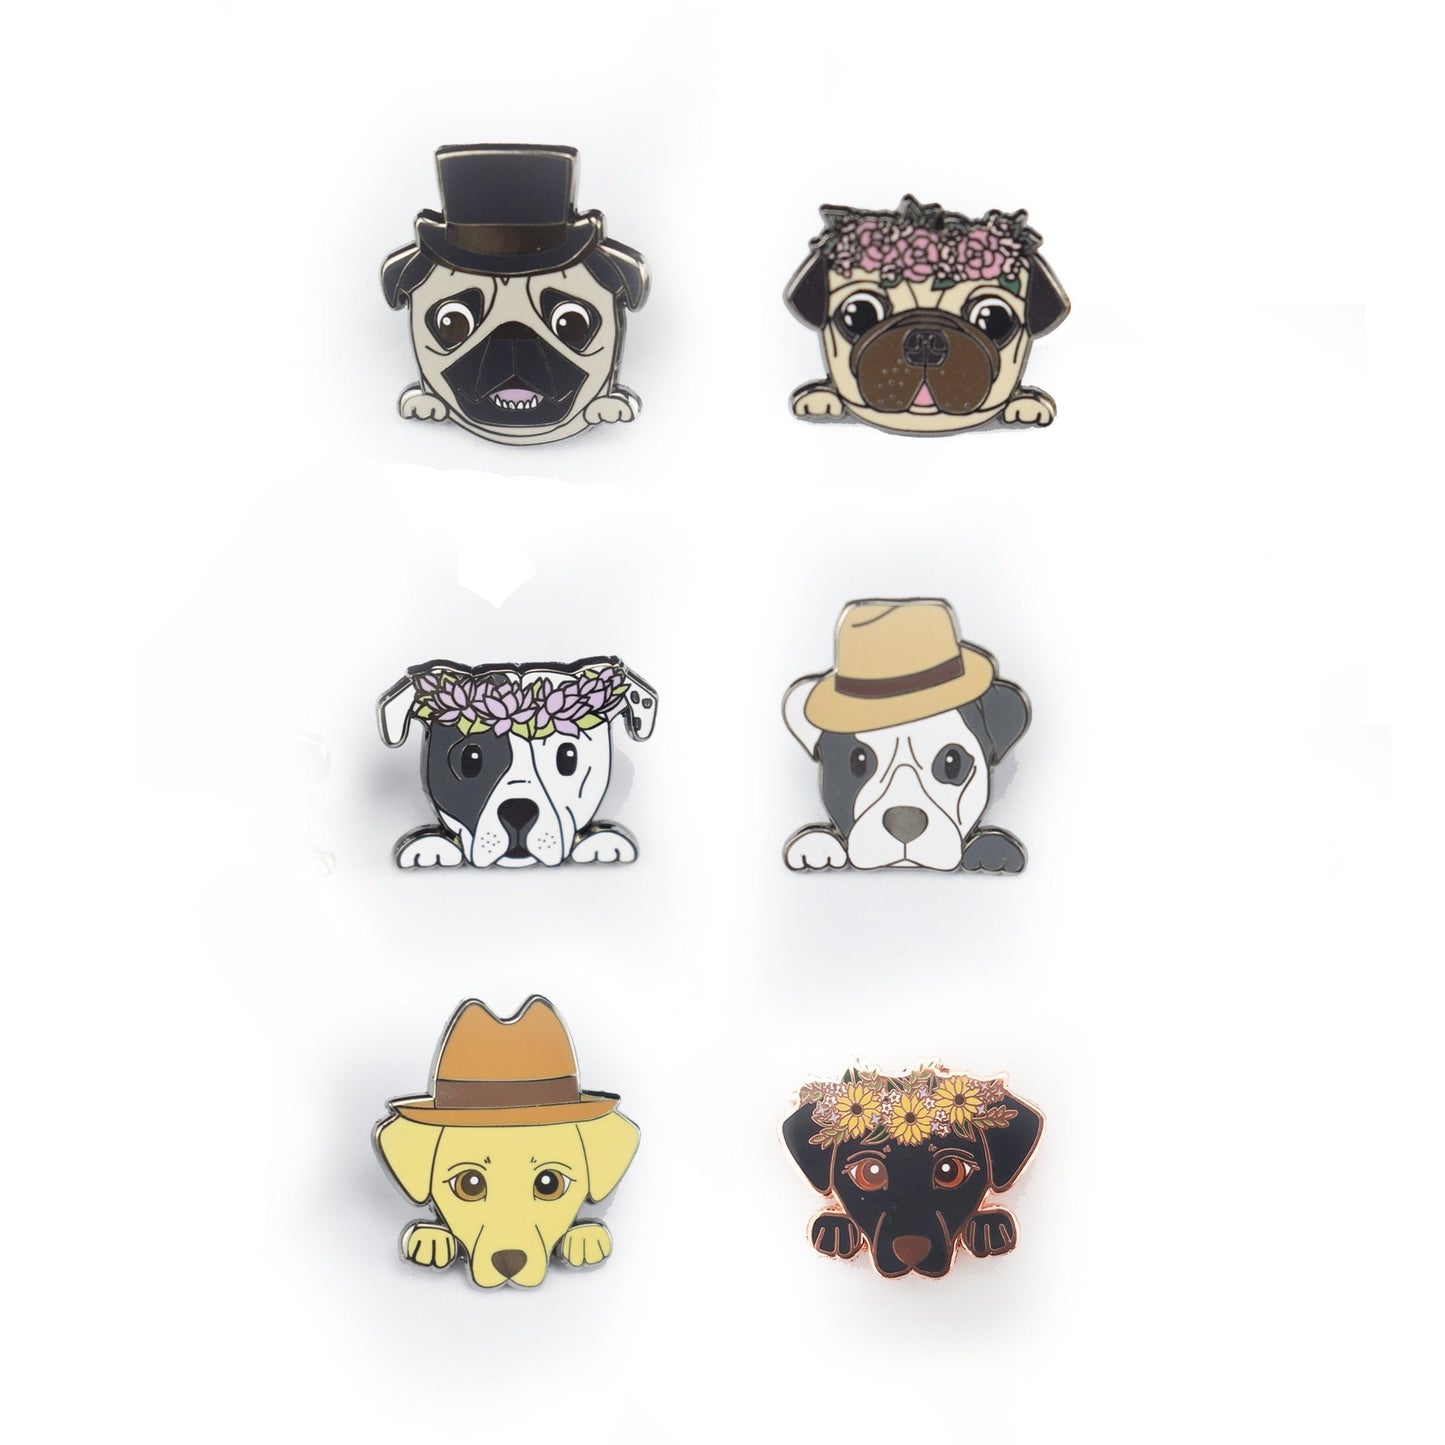 Pug with Top Hat - Small Enamel Pin, Pins, Brooches & Lapel Pins